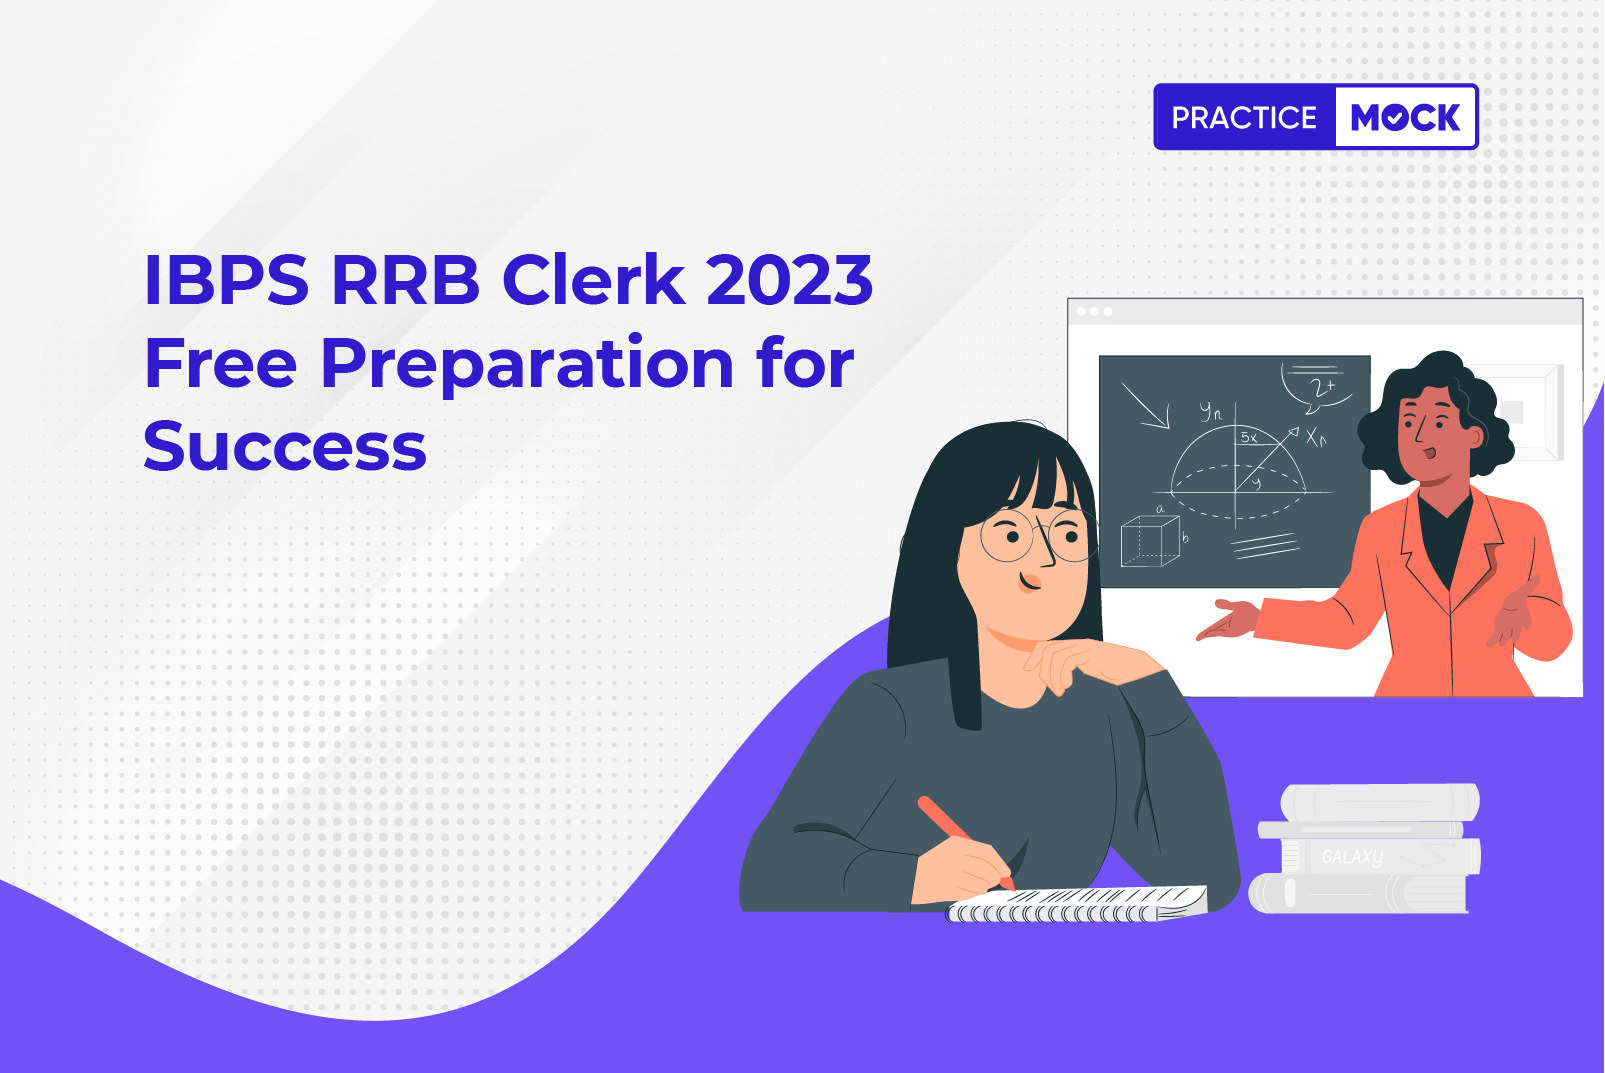 How to Start Preparing for RRB PO 2023 Exam for Free?